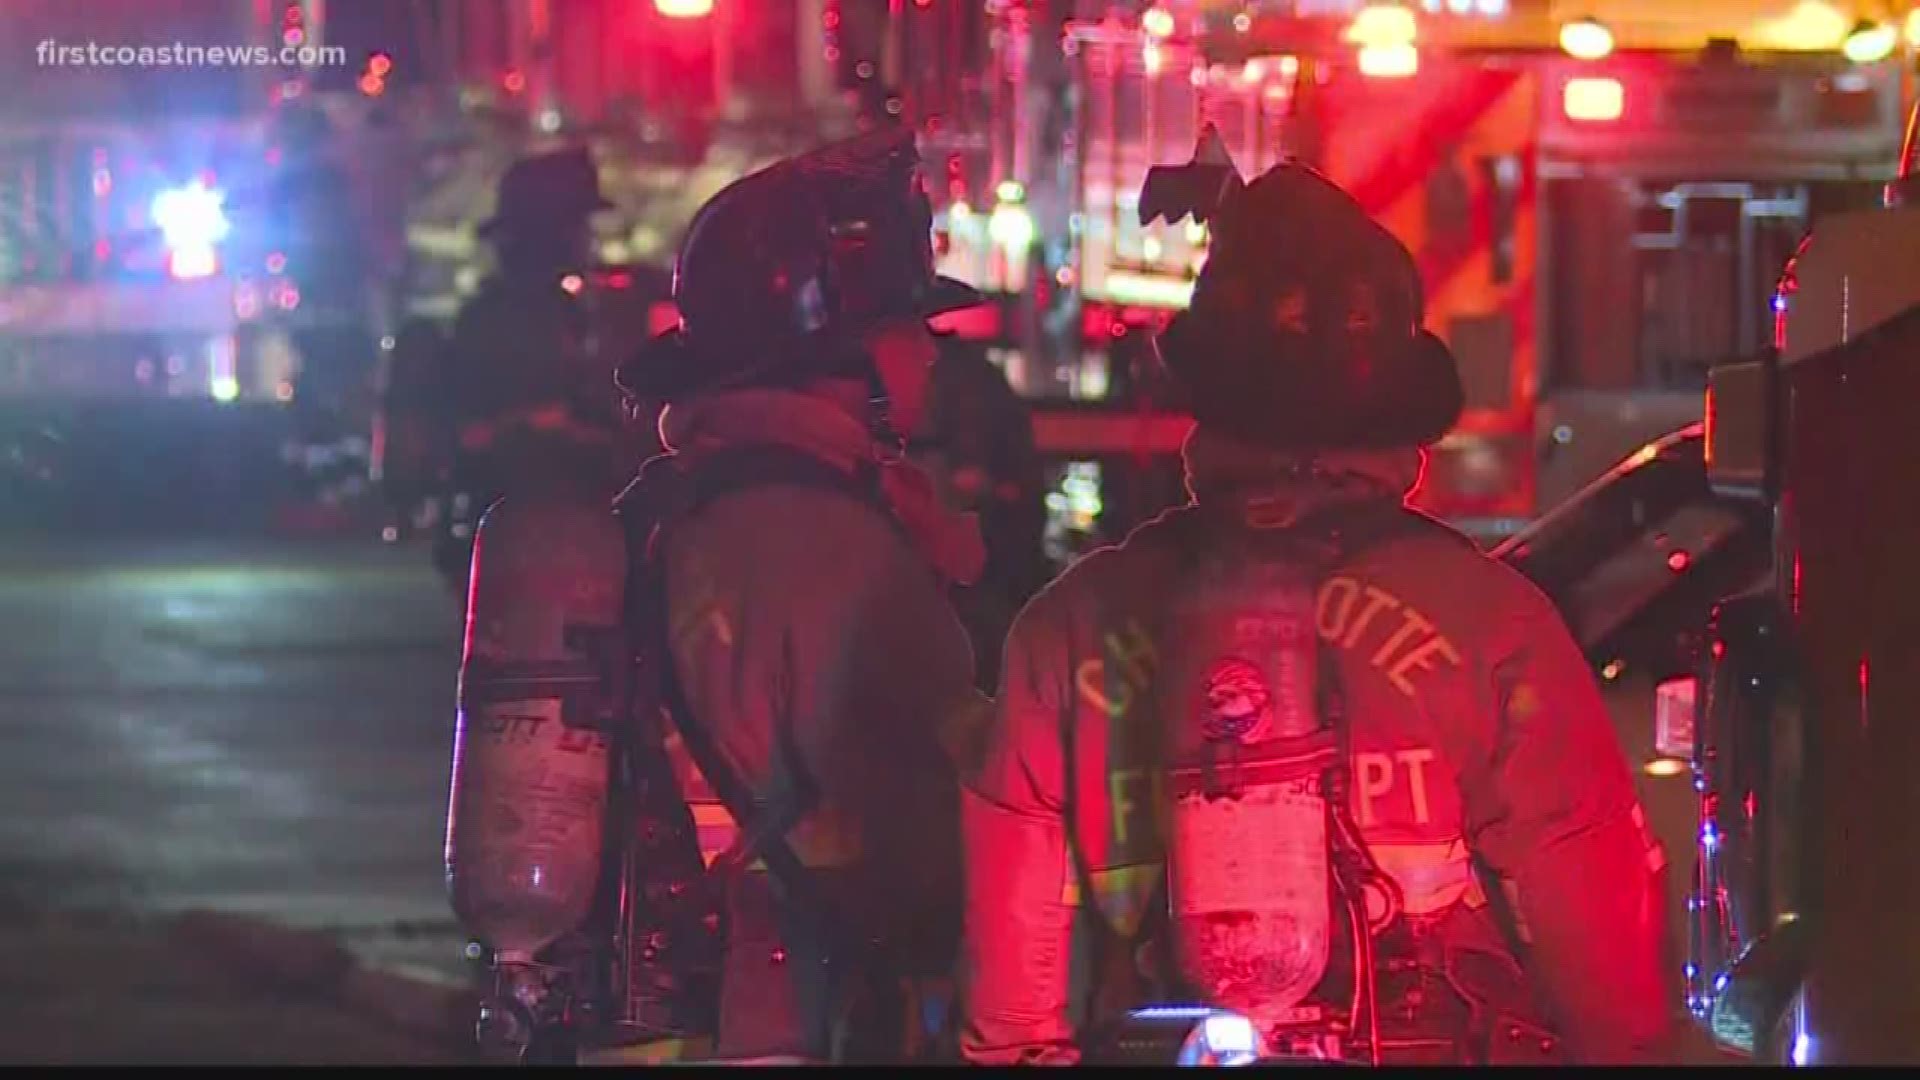 Four Jacksonville firefighters wanted to share their experiences with First Coast News to shed light on the trauma they witness every day and how the impact from it all was swept under the rug for decades.